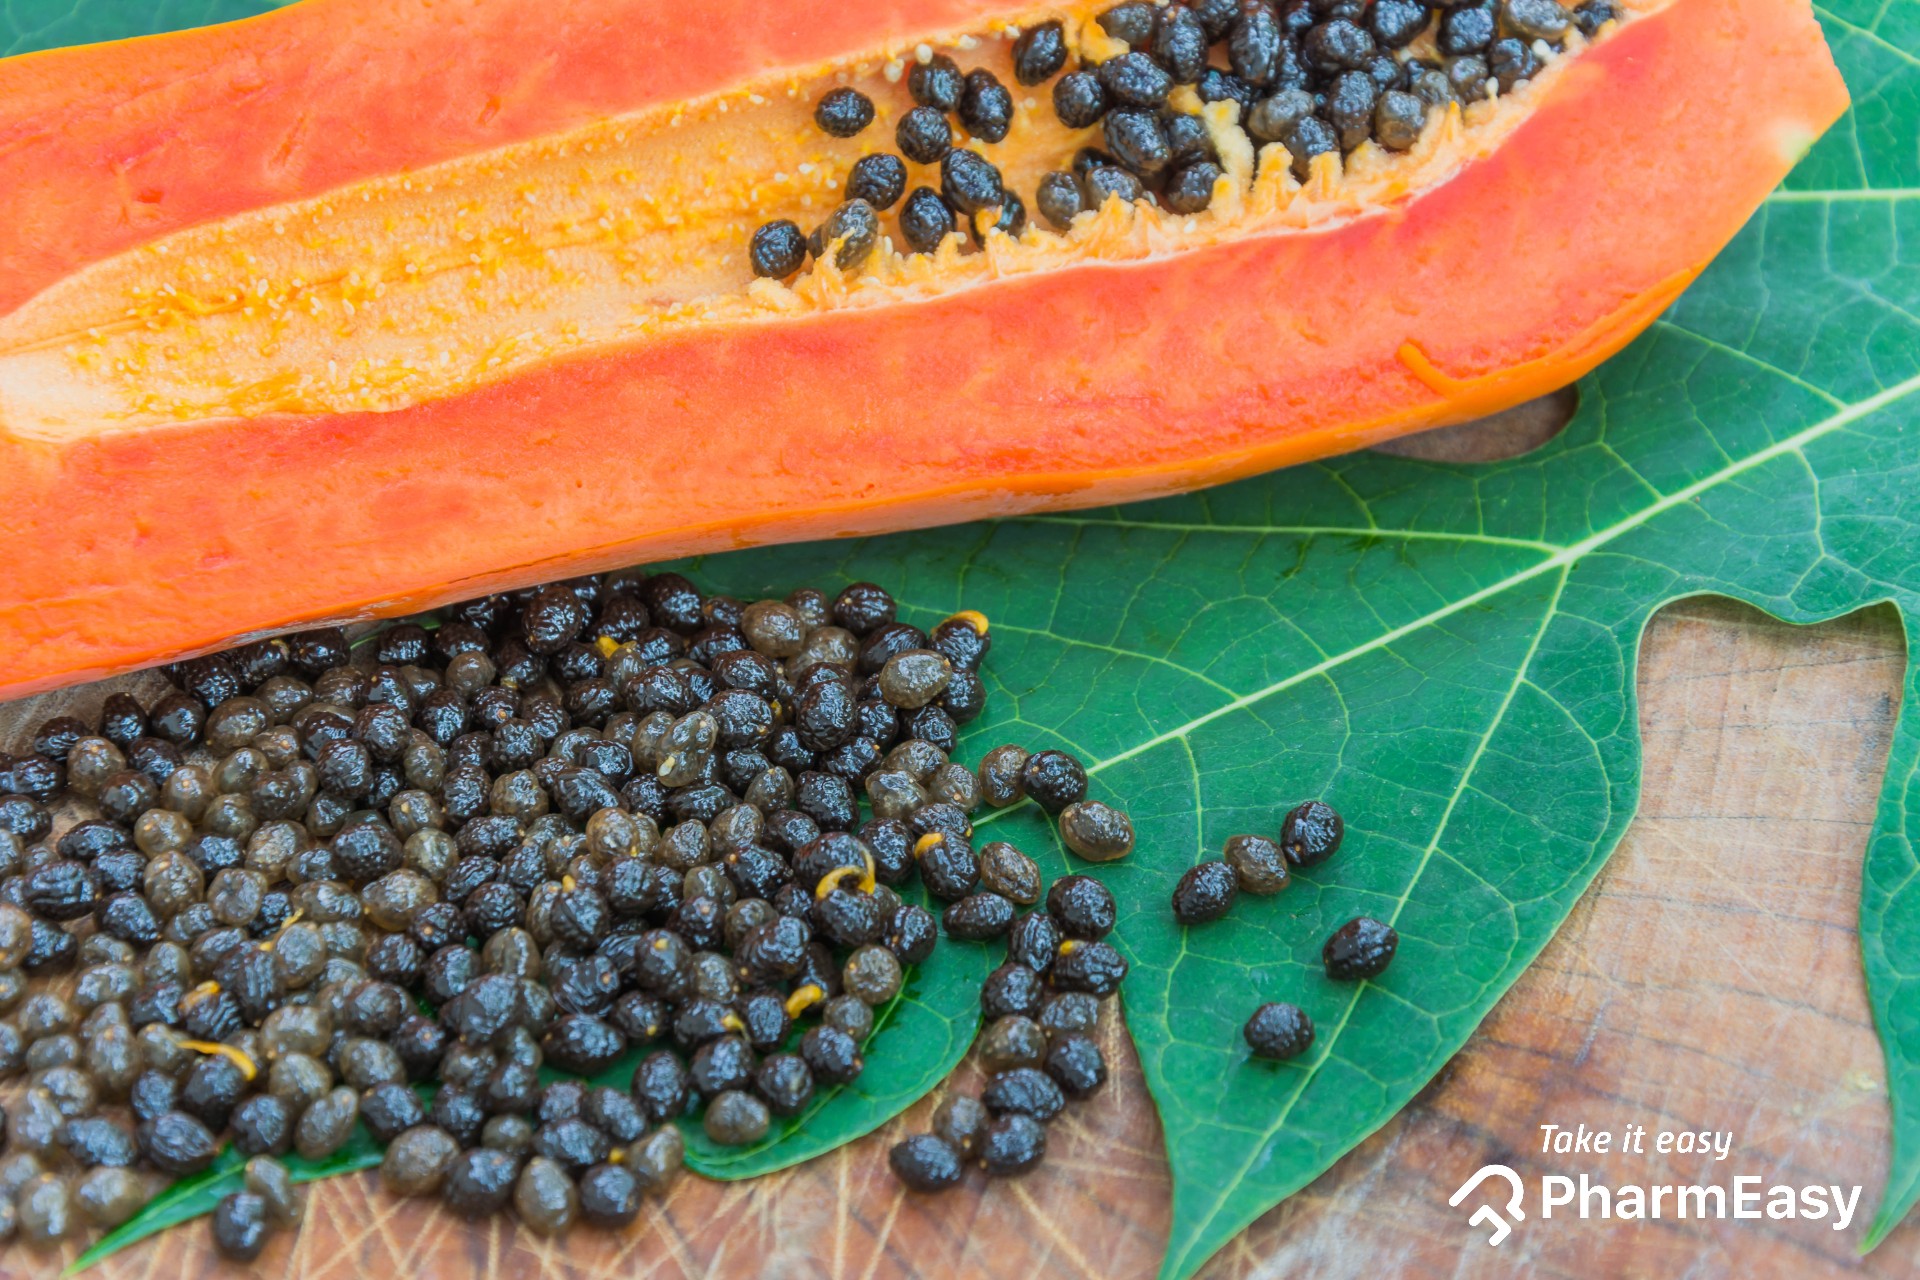 10 Amazing Health Benefits of Papaya Seeds That You Should Know!